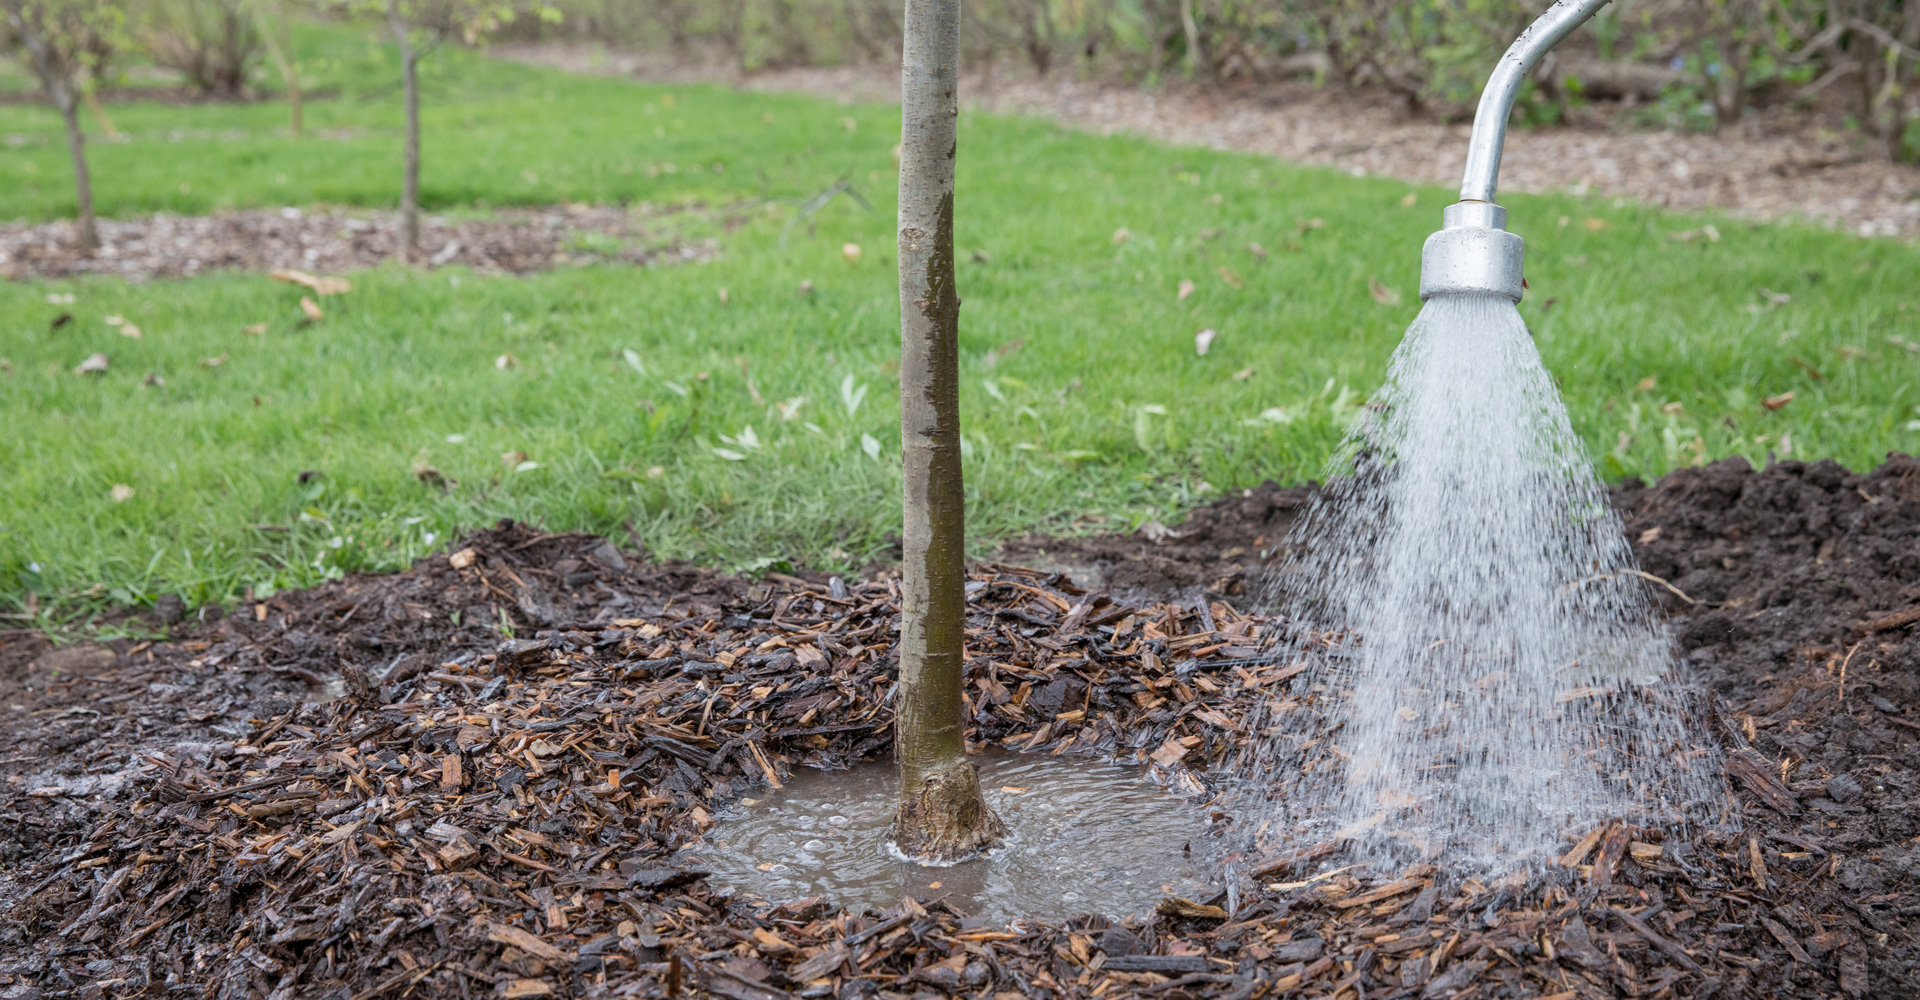 A tree gets water after being planted